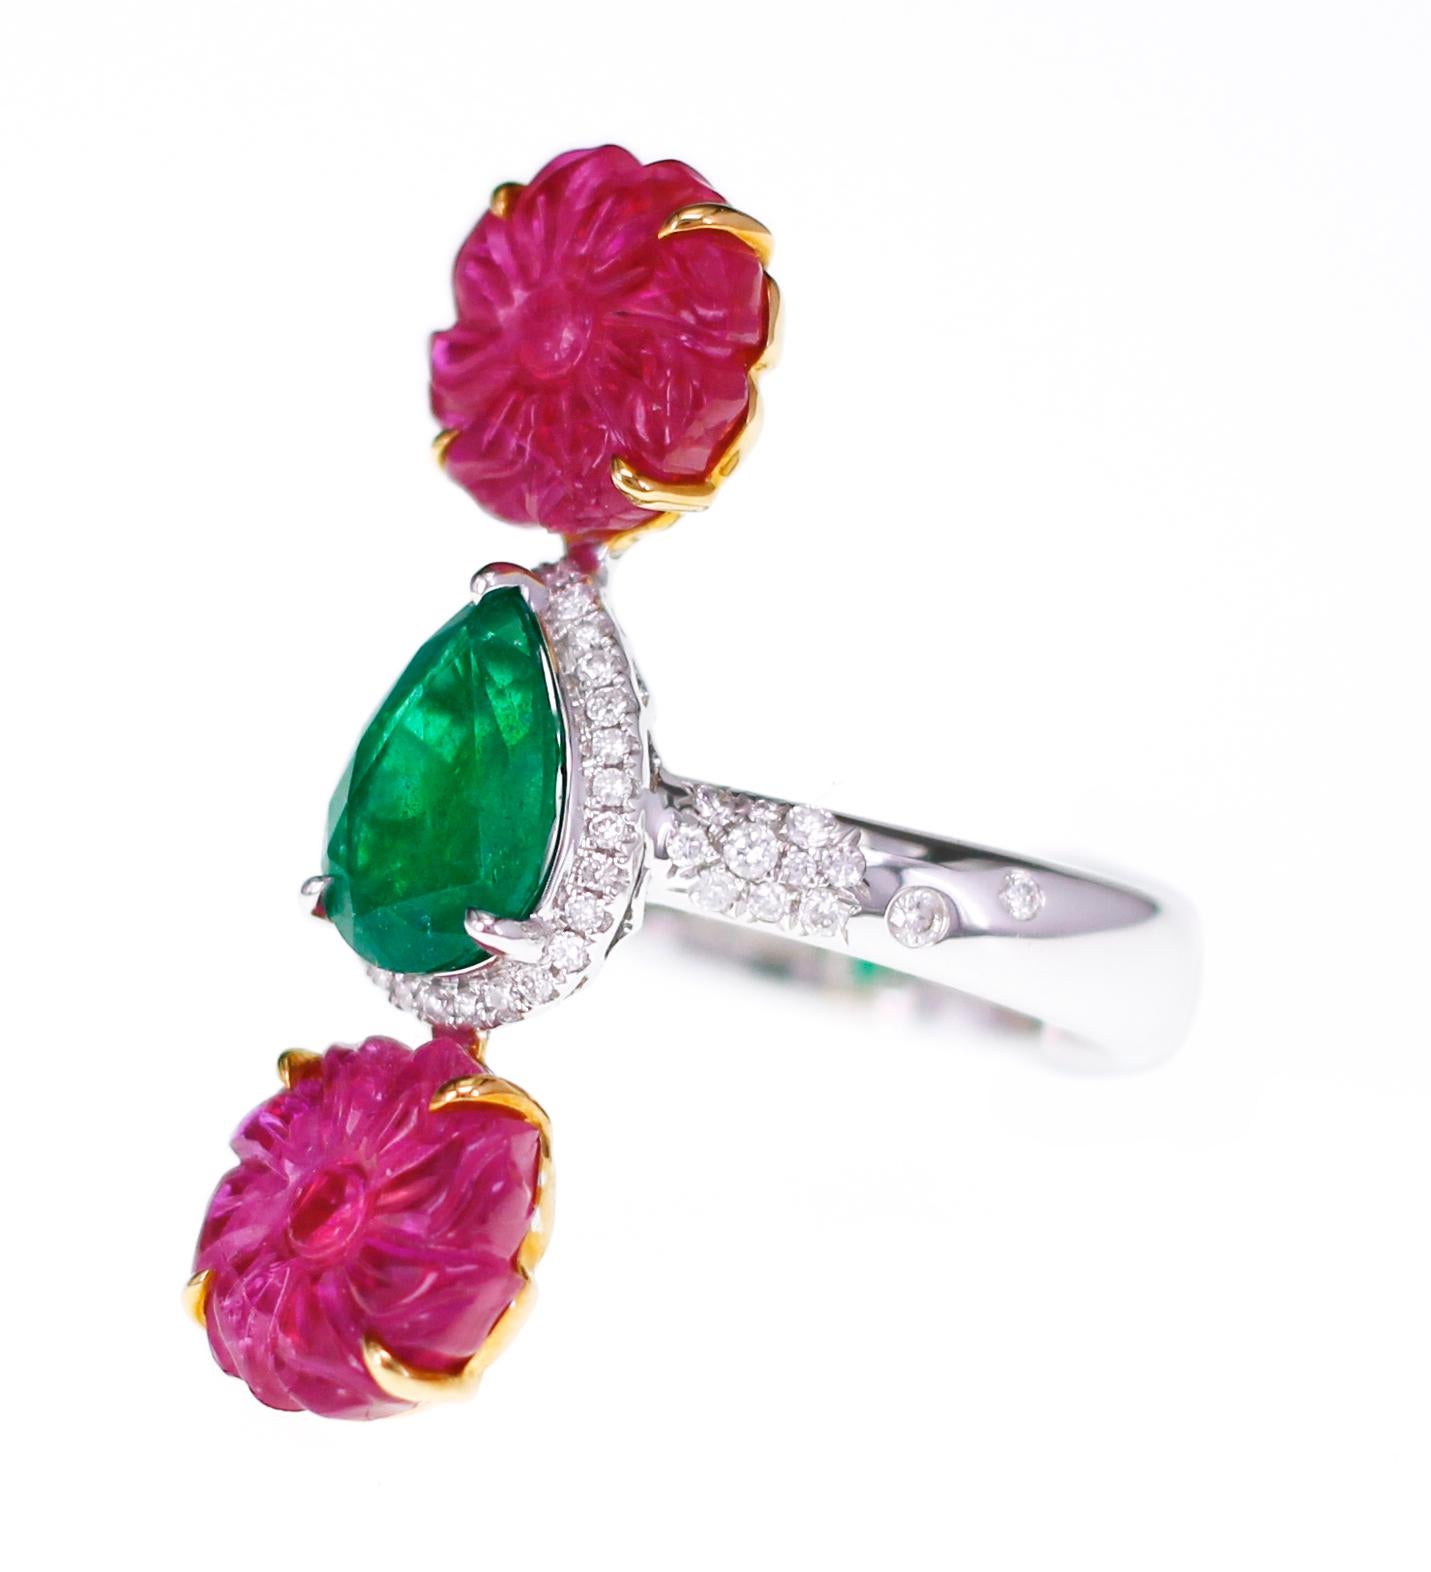 Round Cut 6 Carat Antique Ruby Carving with 1.55 Carat Vivid Green Emerald For Sale